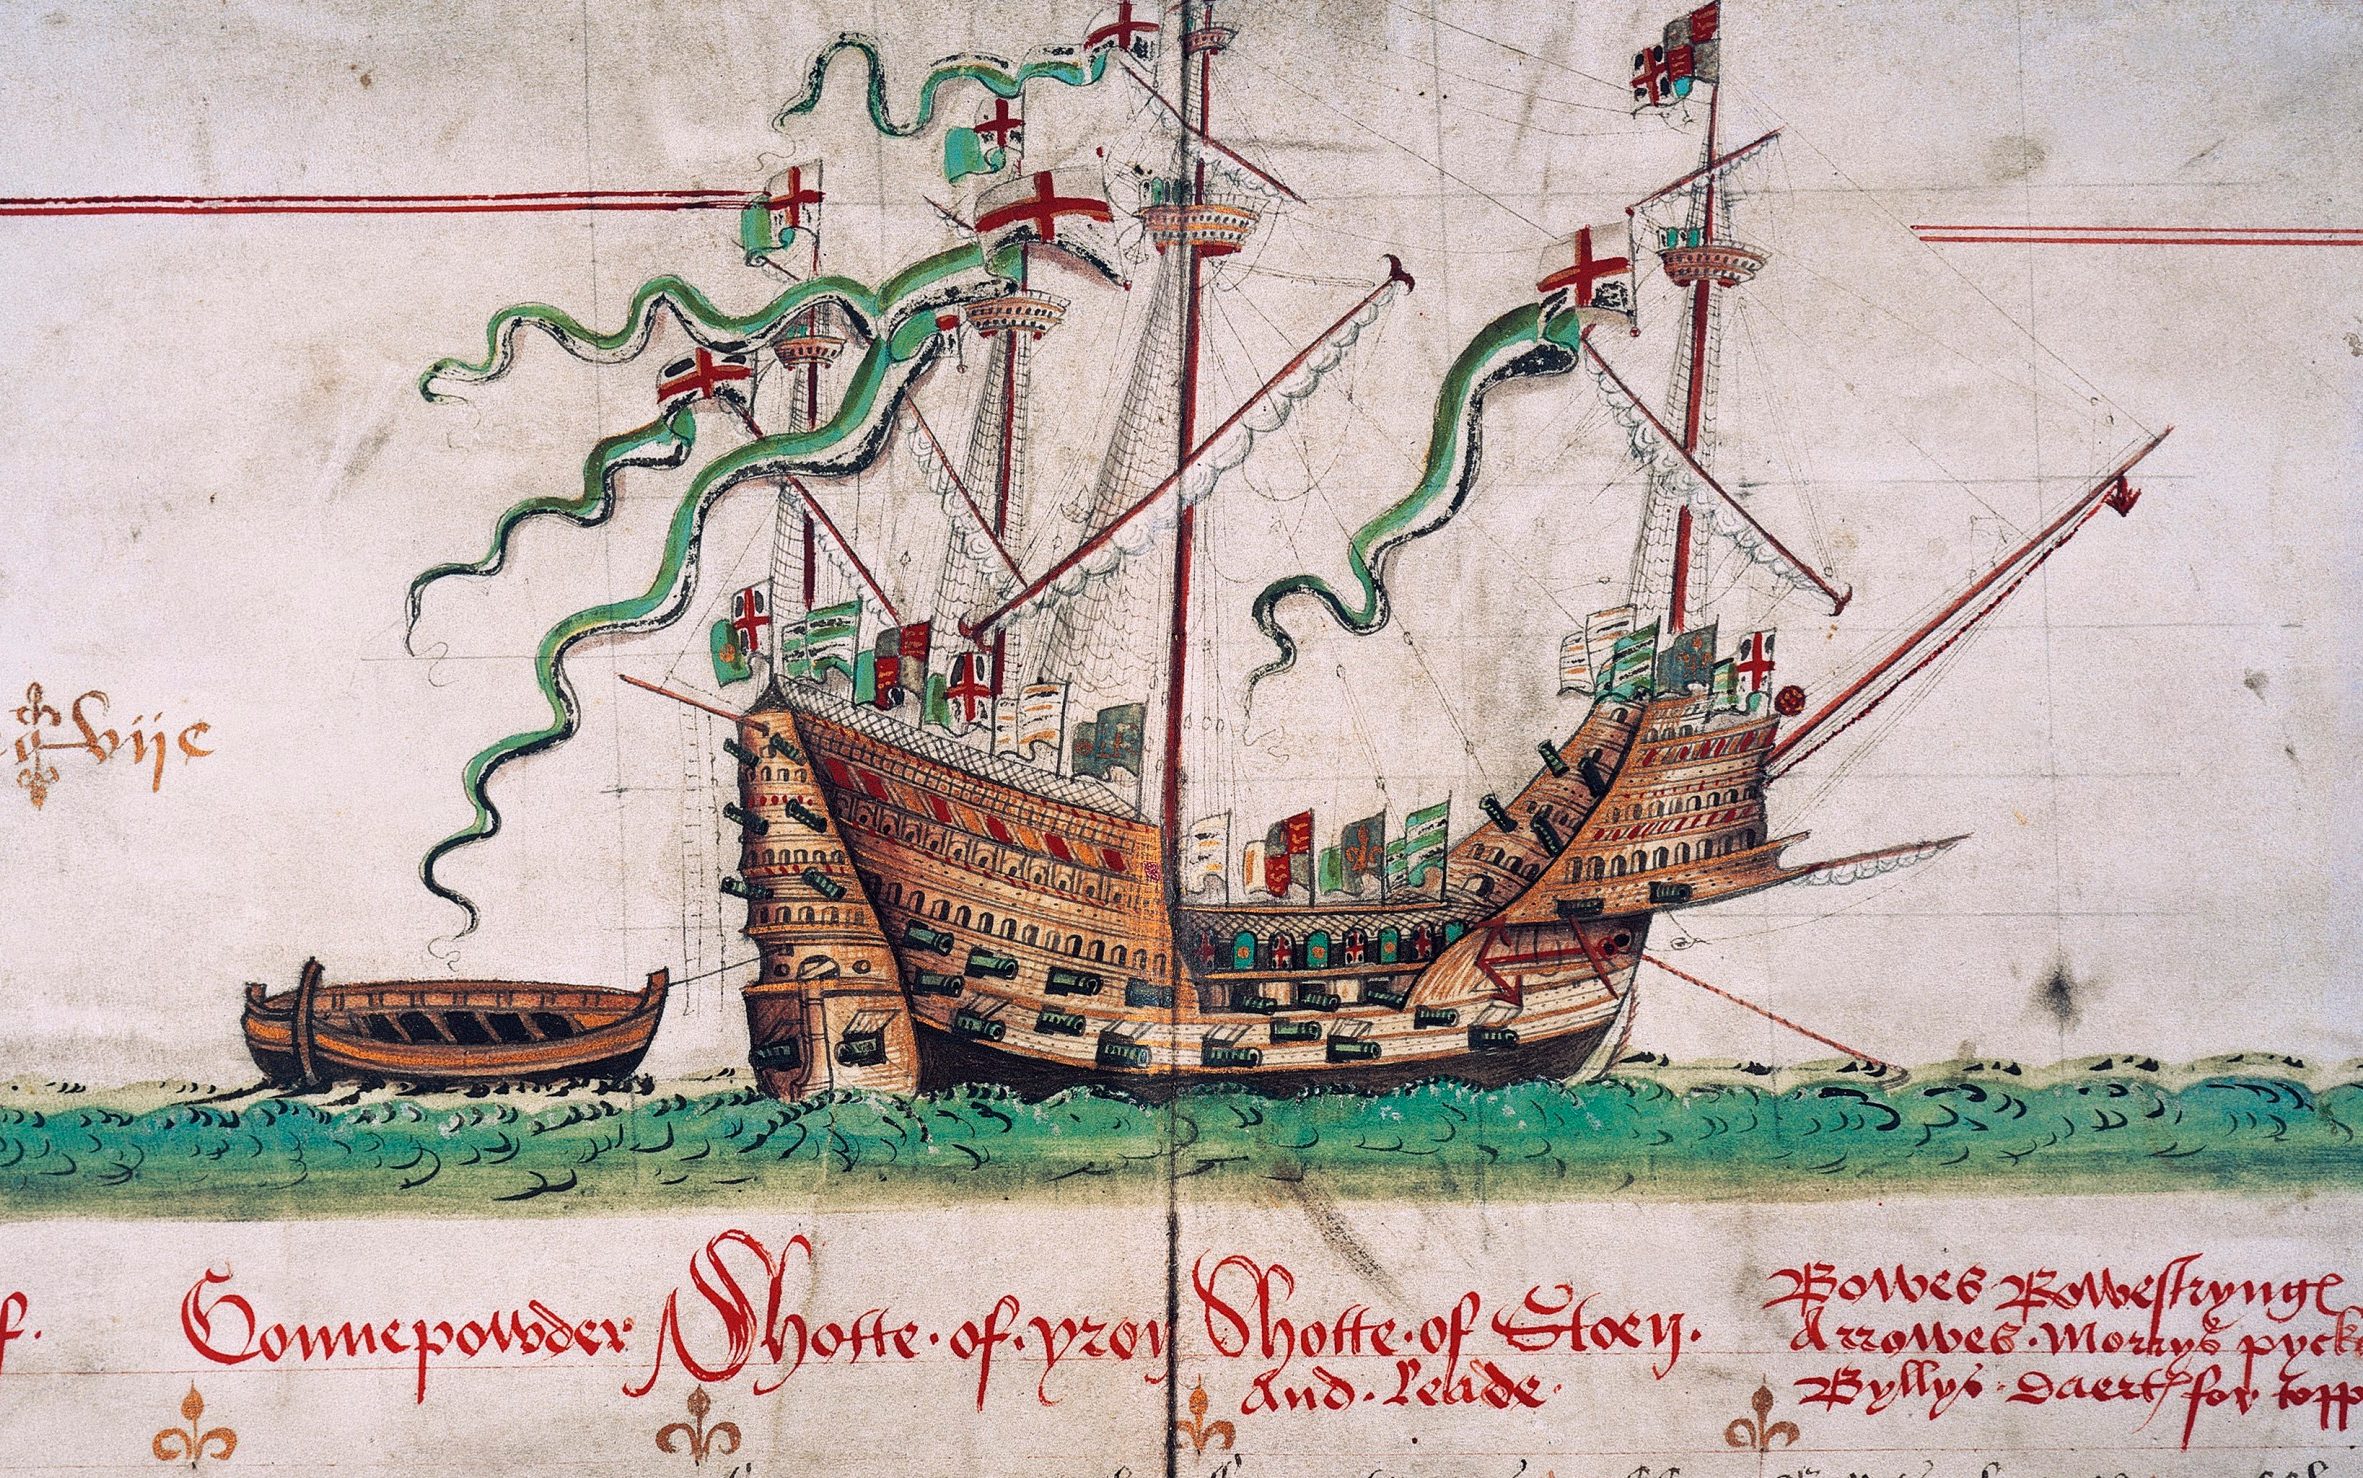 Curators of Mary Rose museum criticised after claiming objects found on ship have LGBT meanings